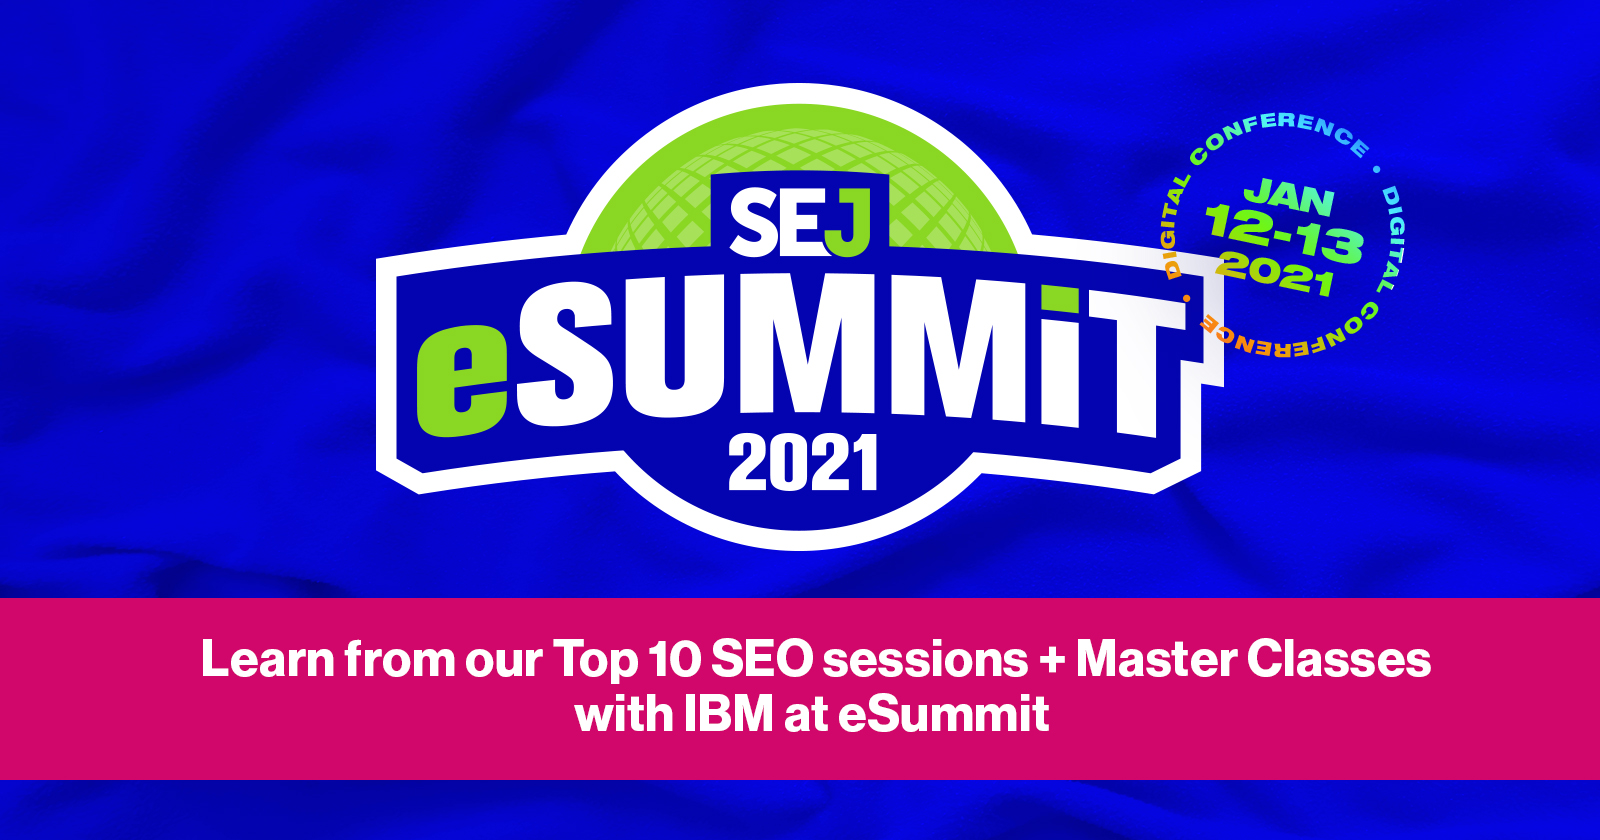 learn from our top 10 seo sessions master classes with ibm at esummit 5fce0cdce3df7